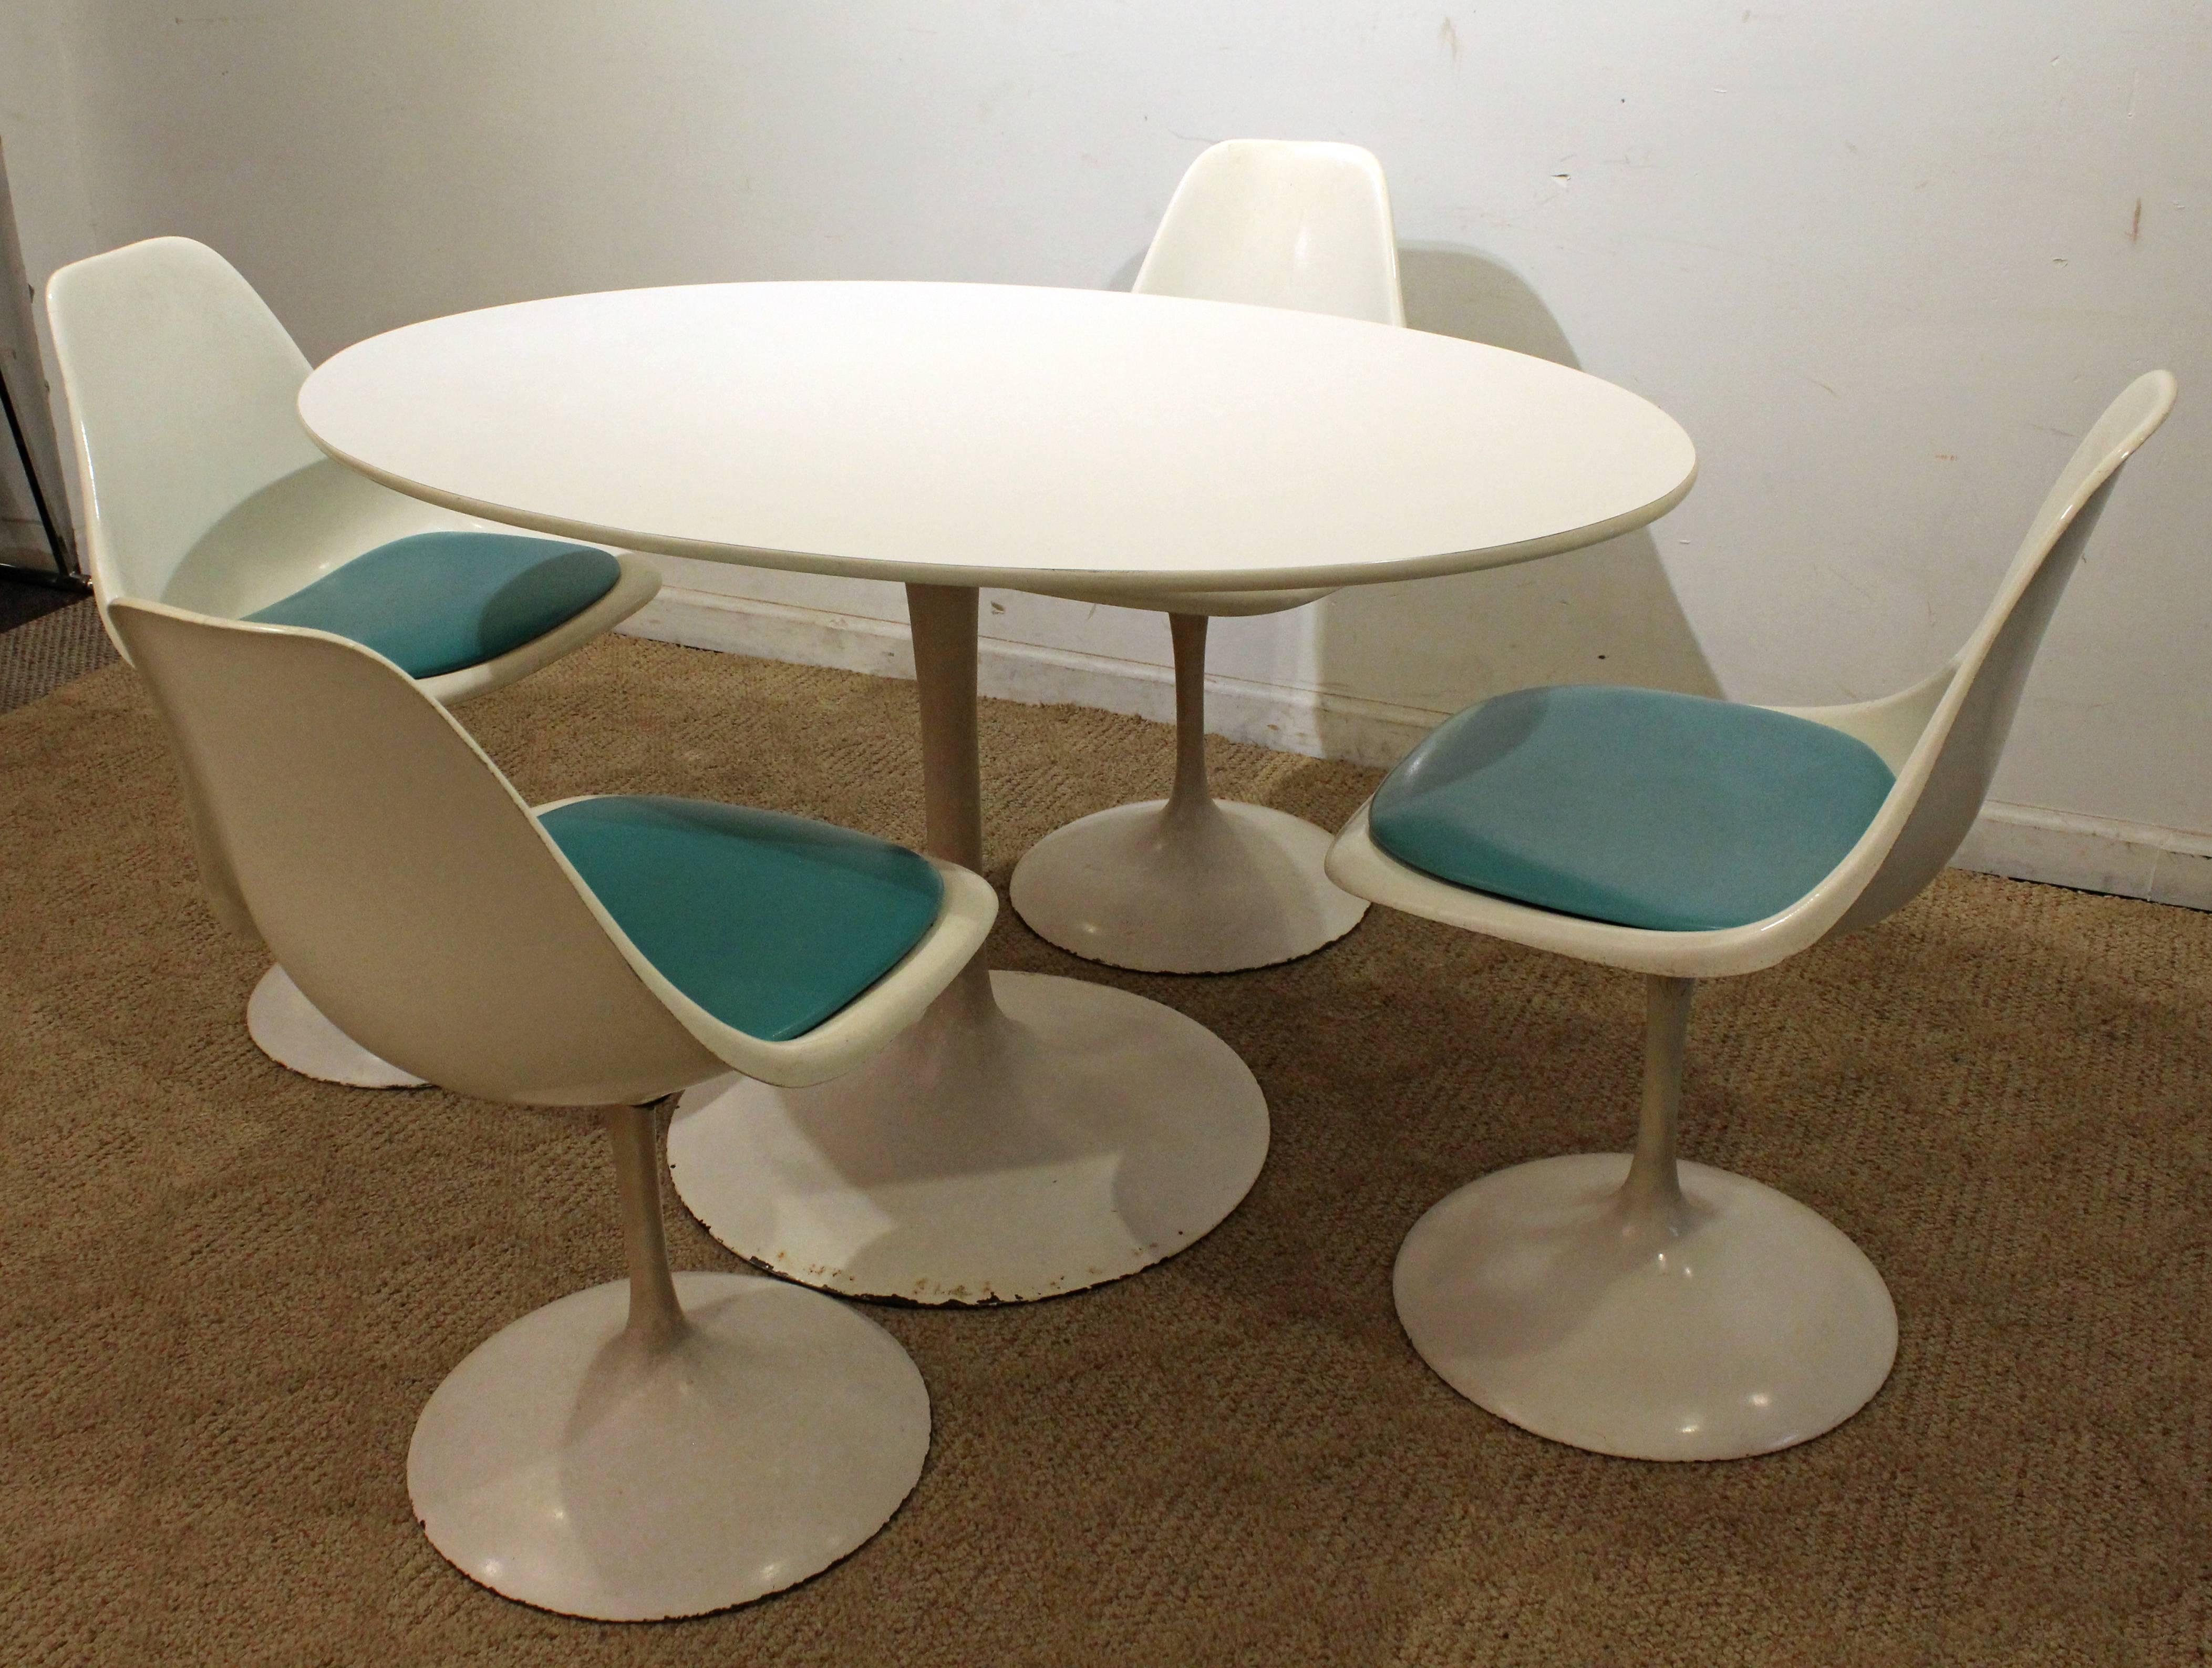 American Mid-Century Modern Set of Five Saarinen-Style Tulip Dining Chairs and Table